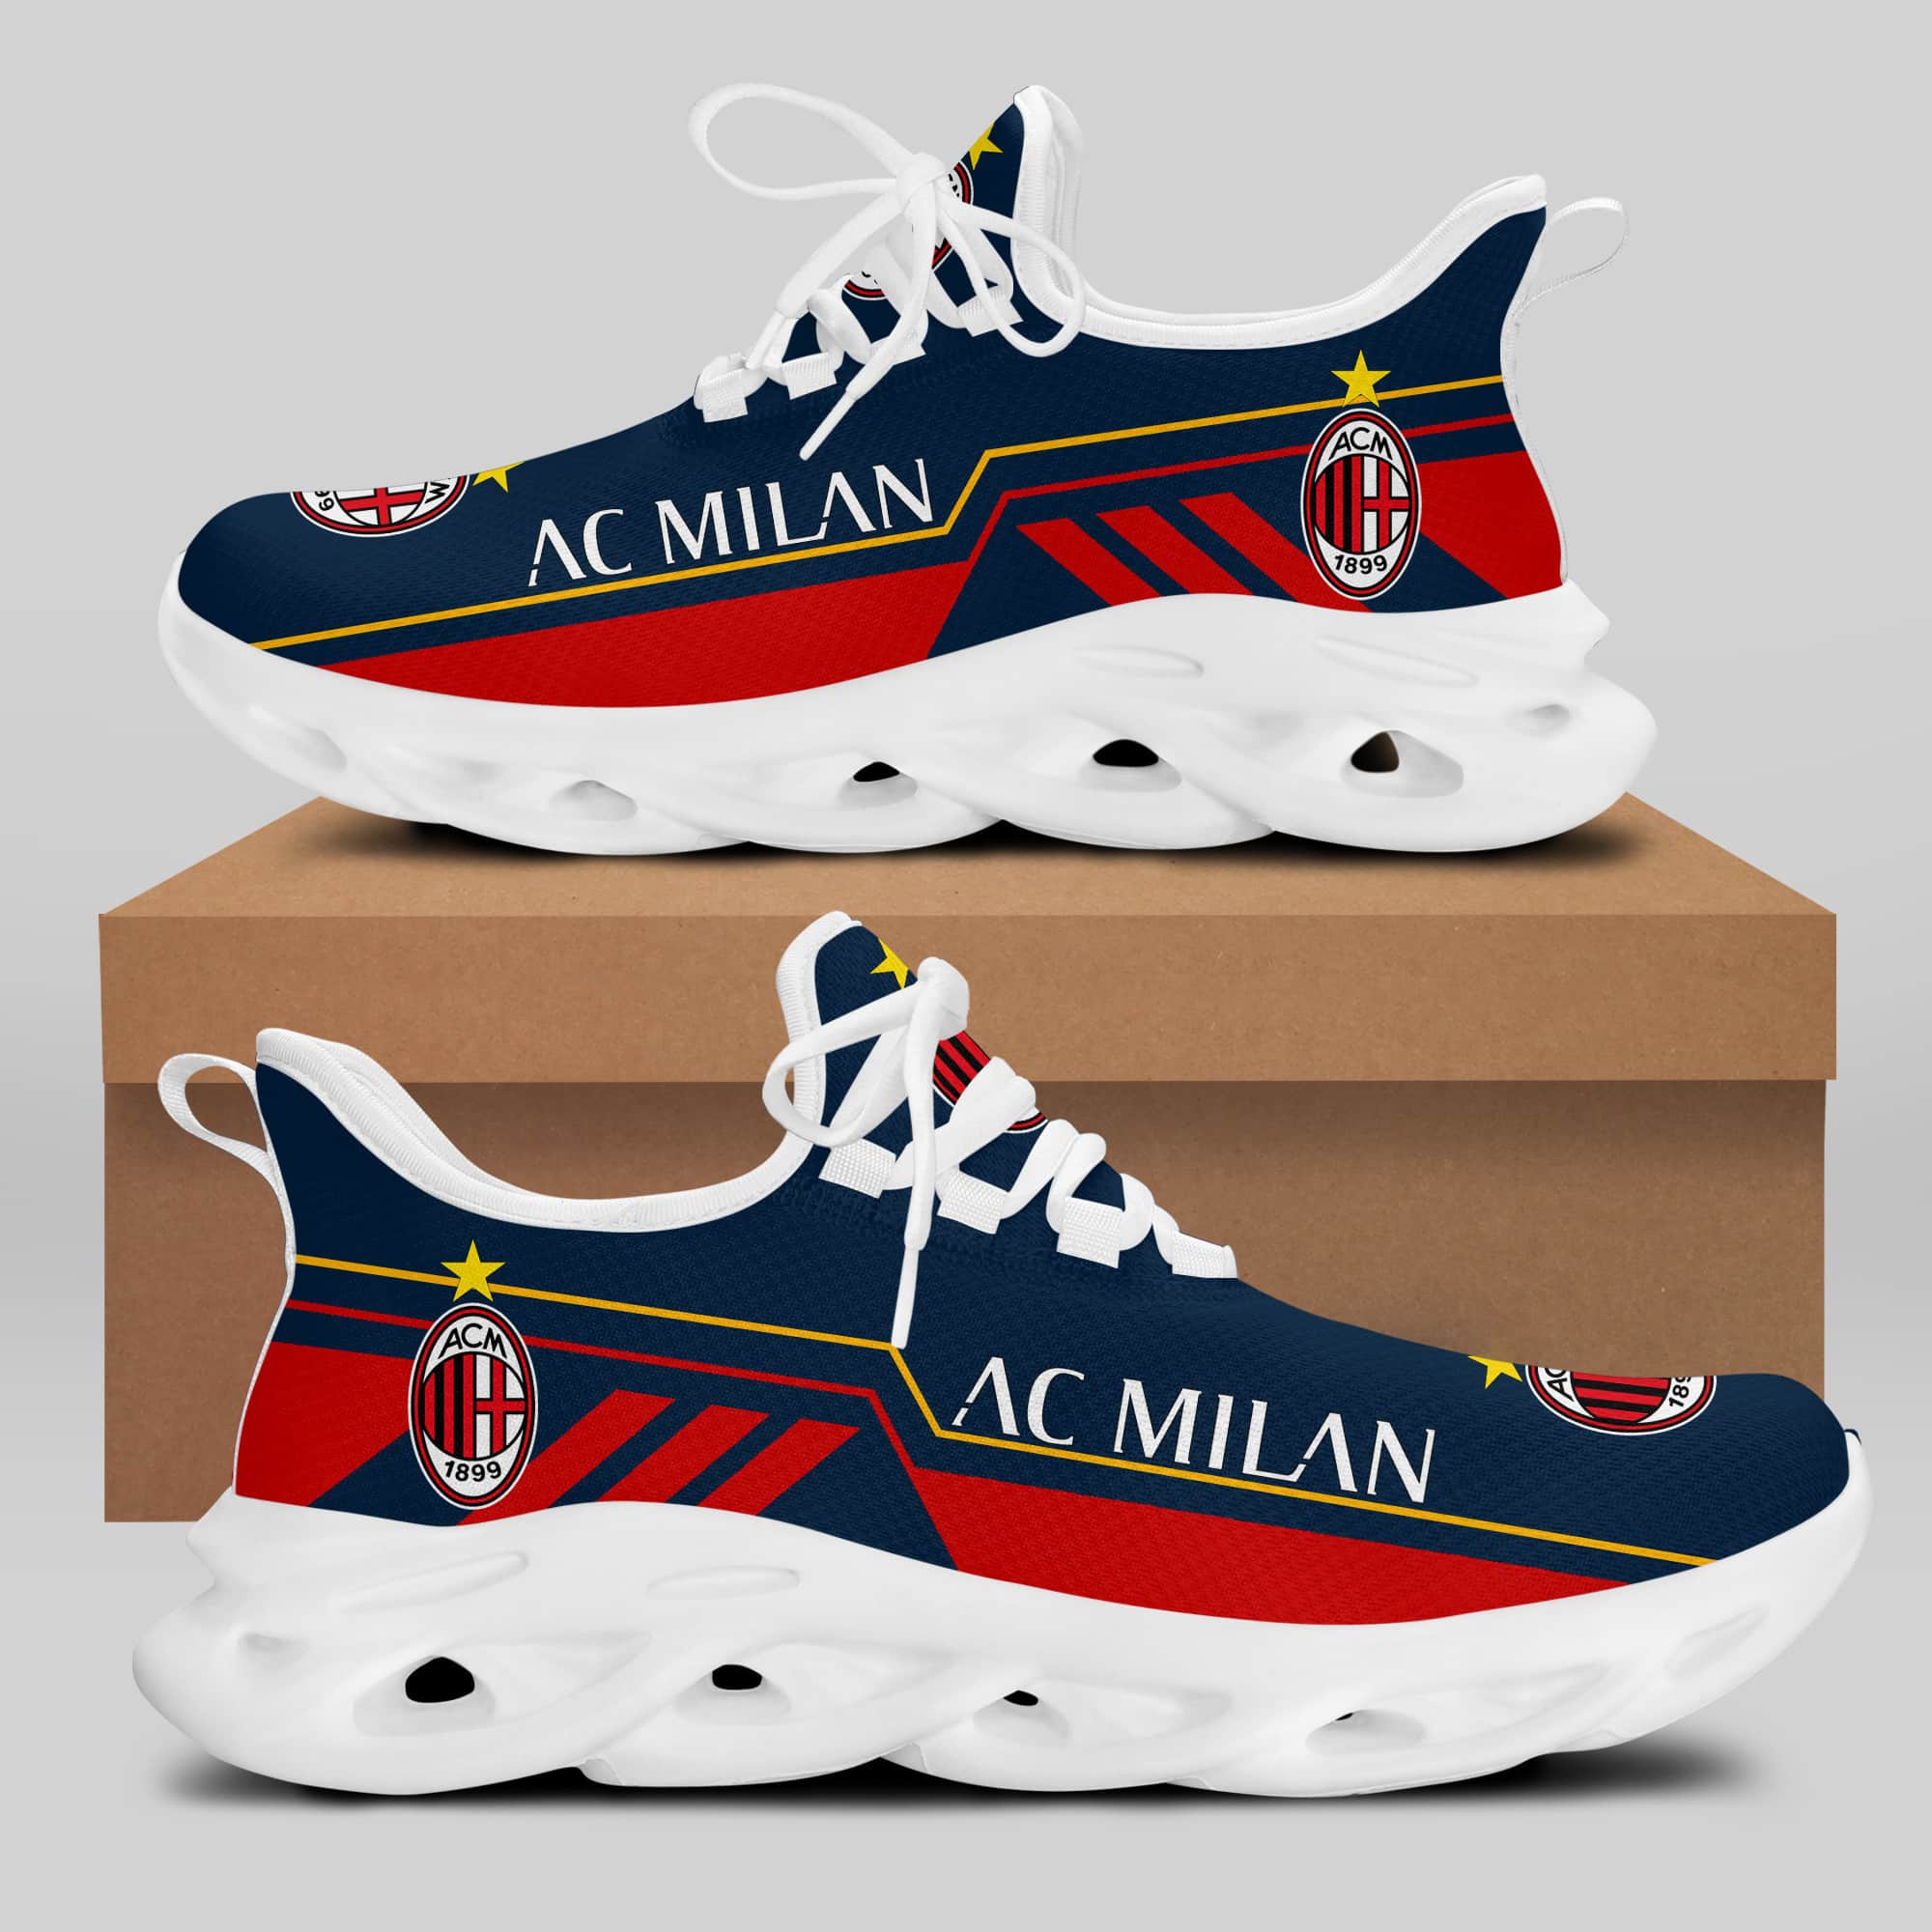 Ac Milan Running Shoes Max Soul Shoes Sneakers Ver 12 2